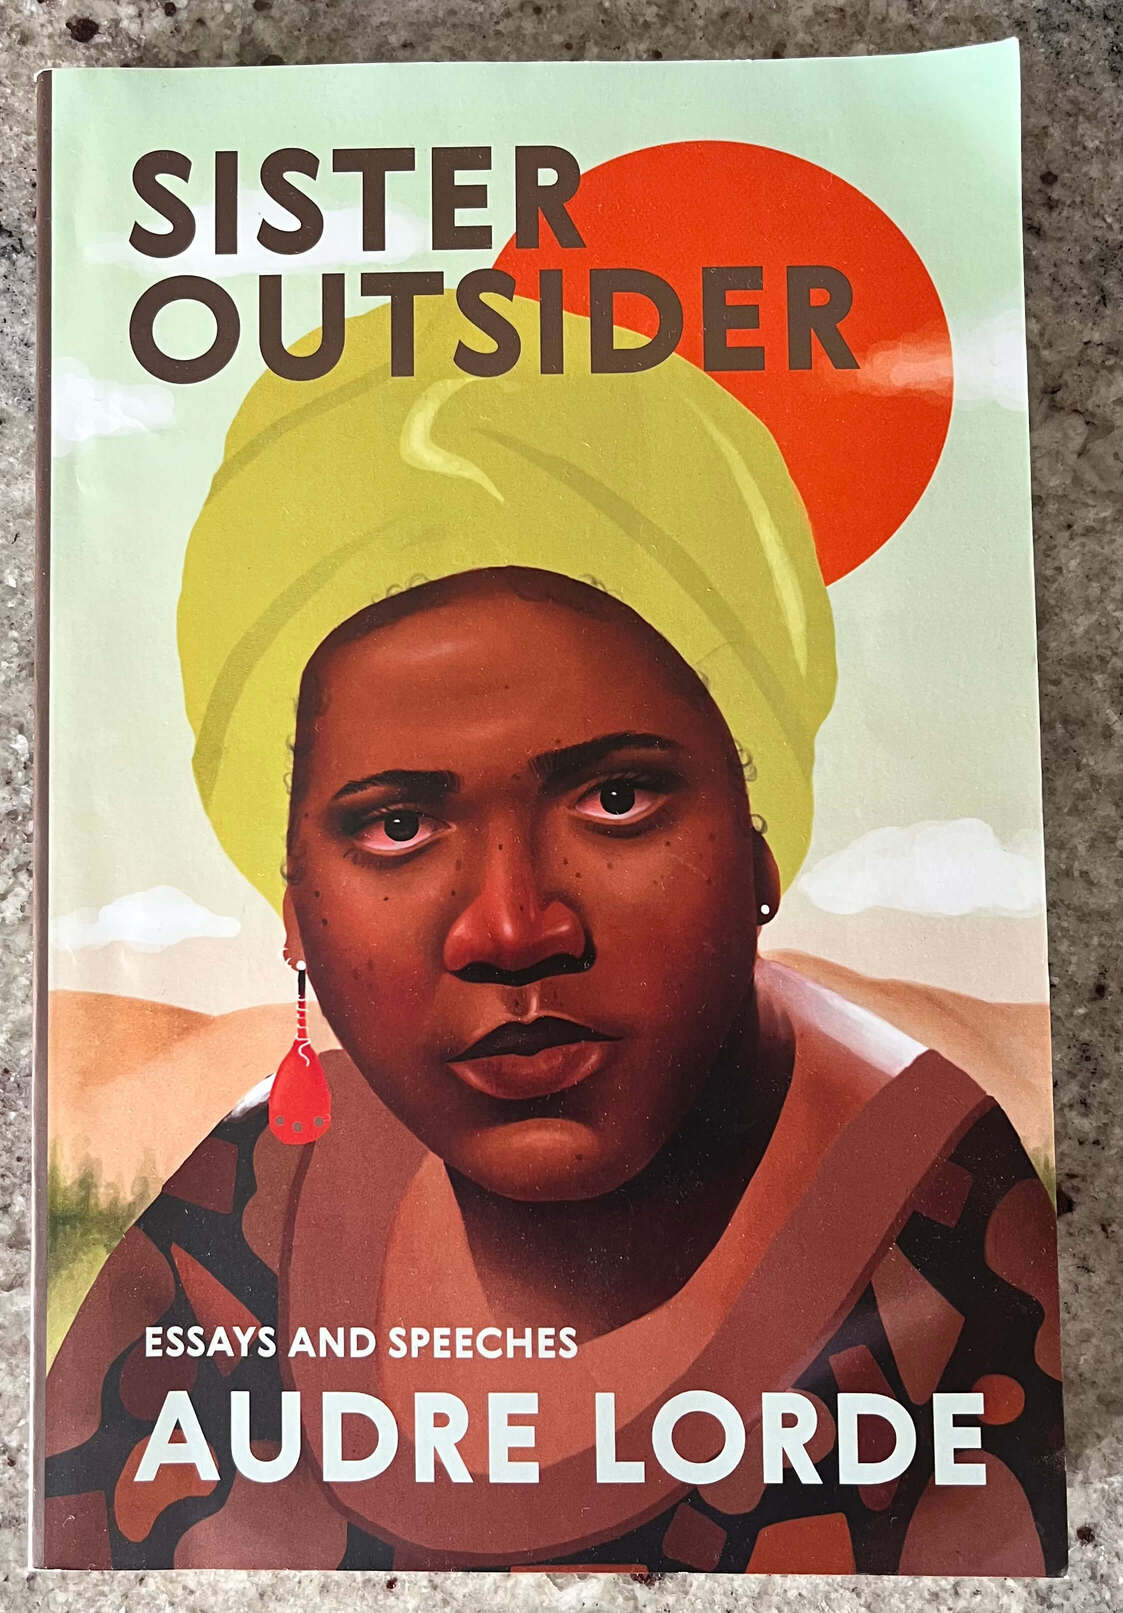 “Sister Outsider: Essays and Speeches” by Audre Lorde.